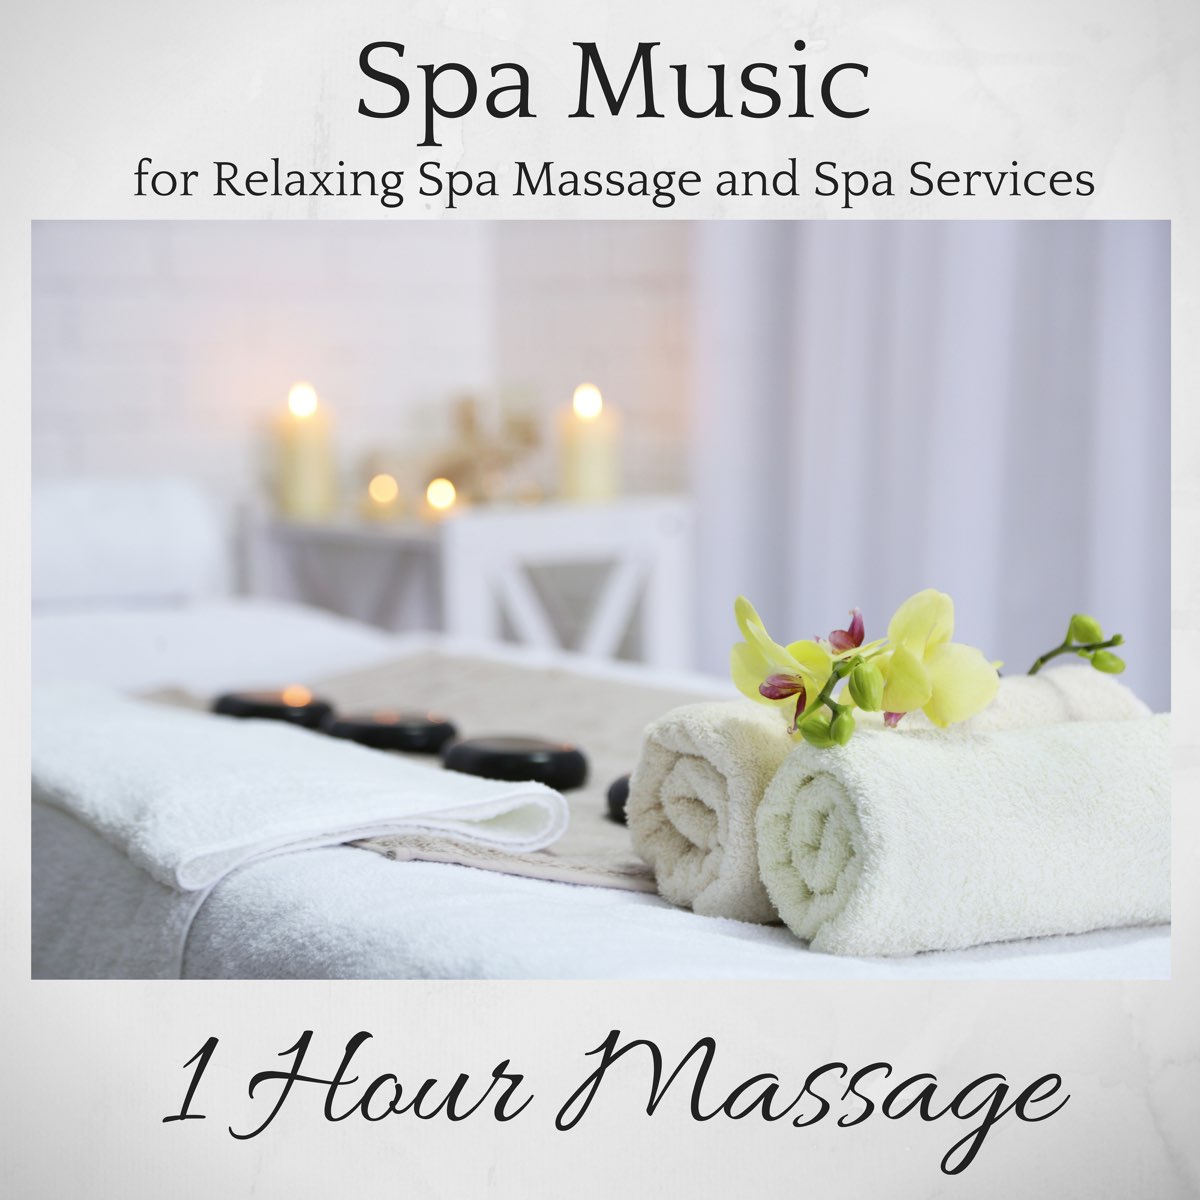 1 Hour Massage - Spa Music for Relaxing Spa Massage and Spa Services -  Album by Serenity Spa Music Relaxation - Apple Music